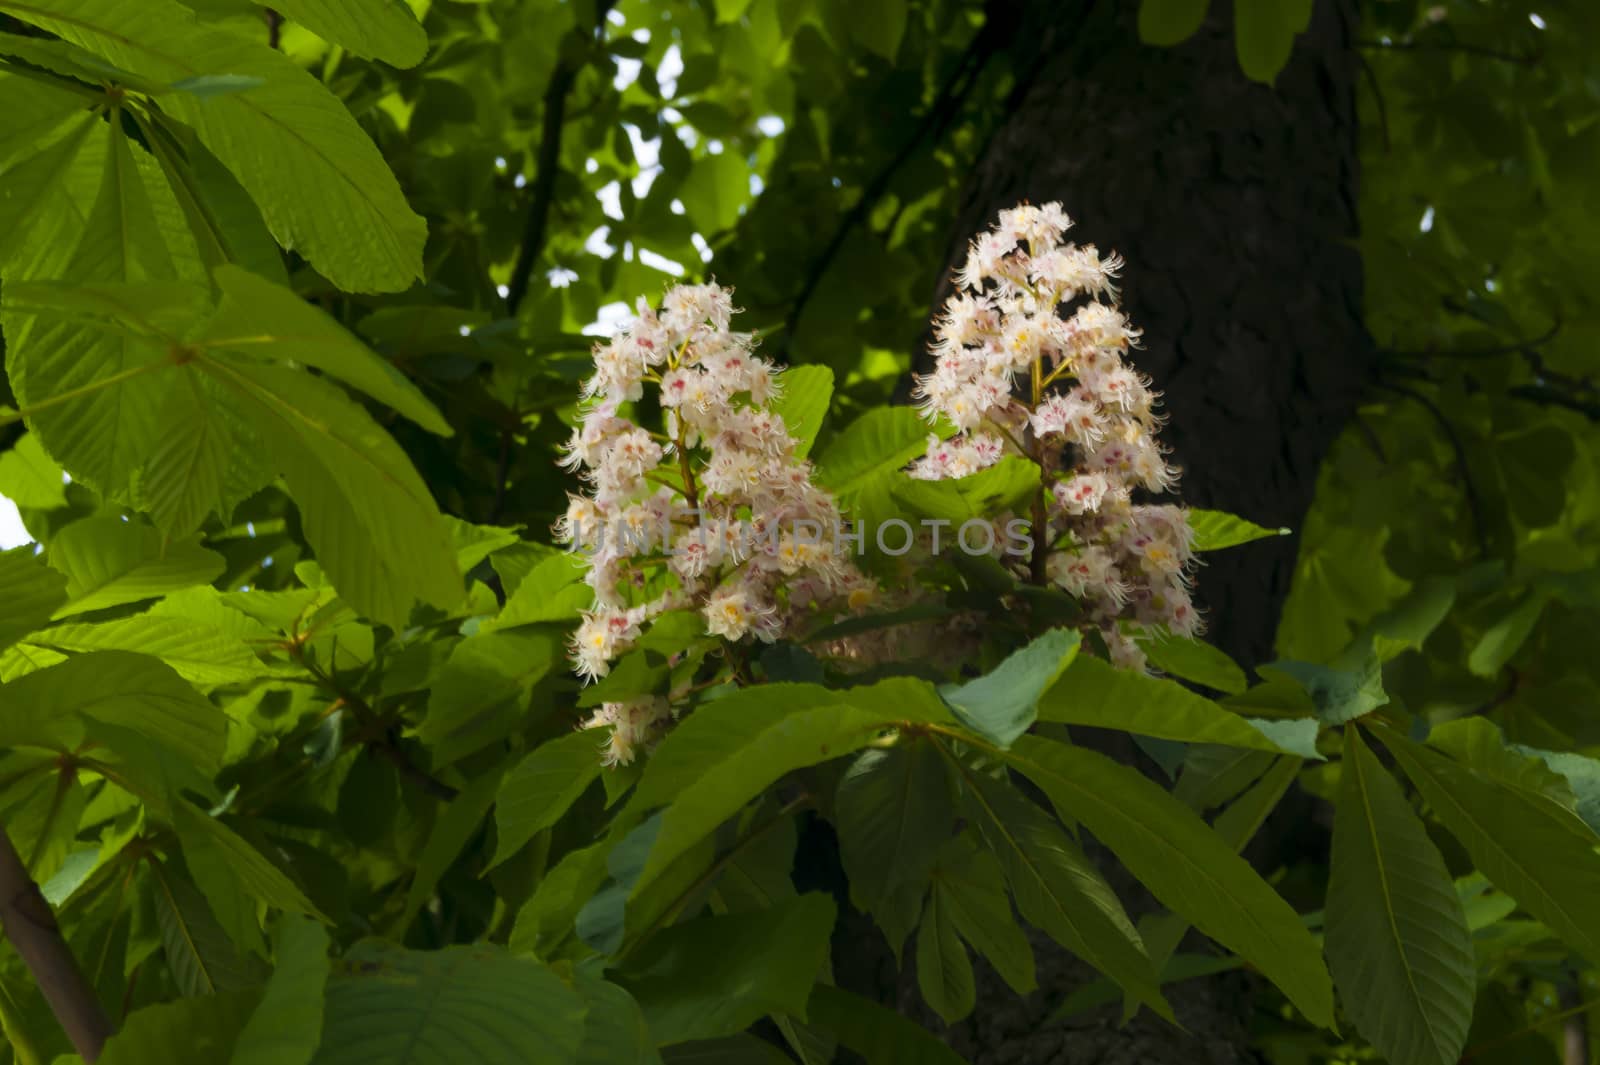 Chestnut branch with white flowers and green leaves